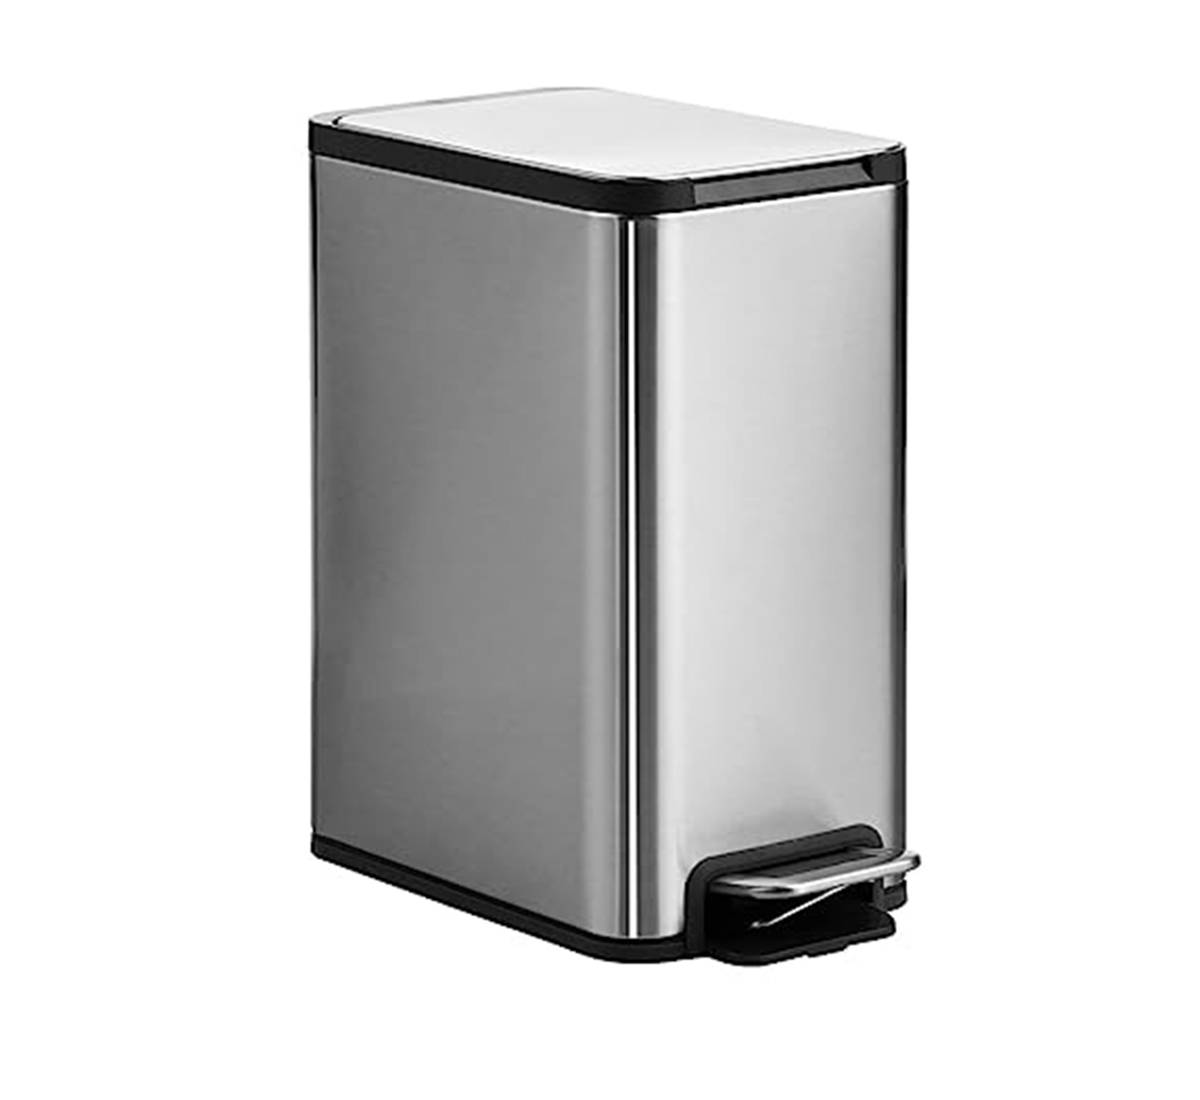 8L Stainless Steel Indoor Trash Can with Foot Pedal